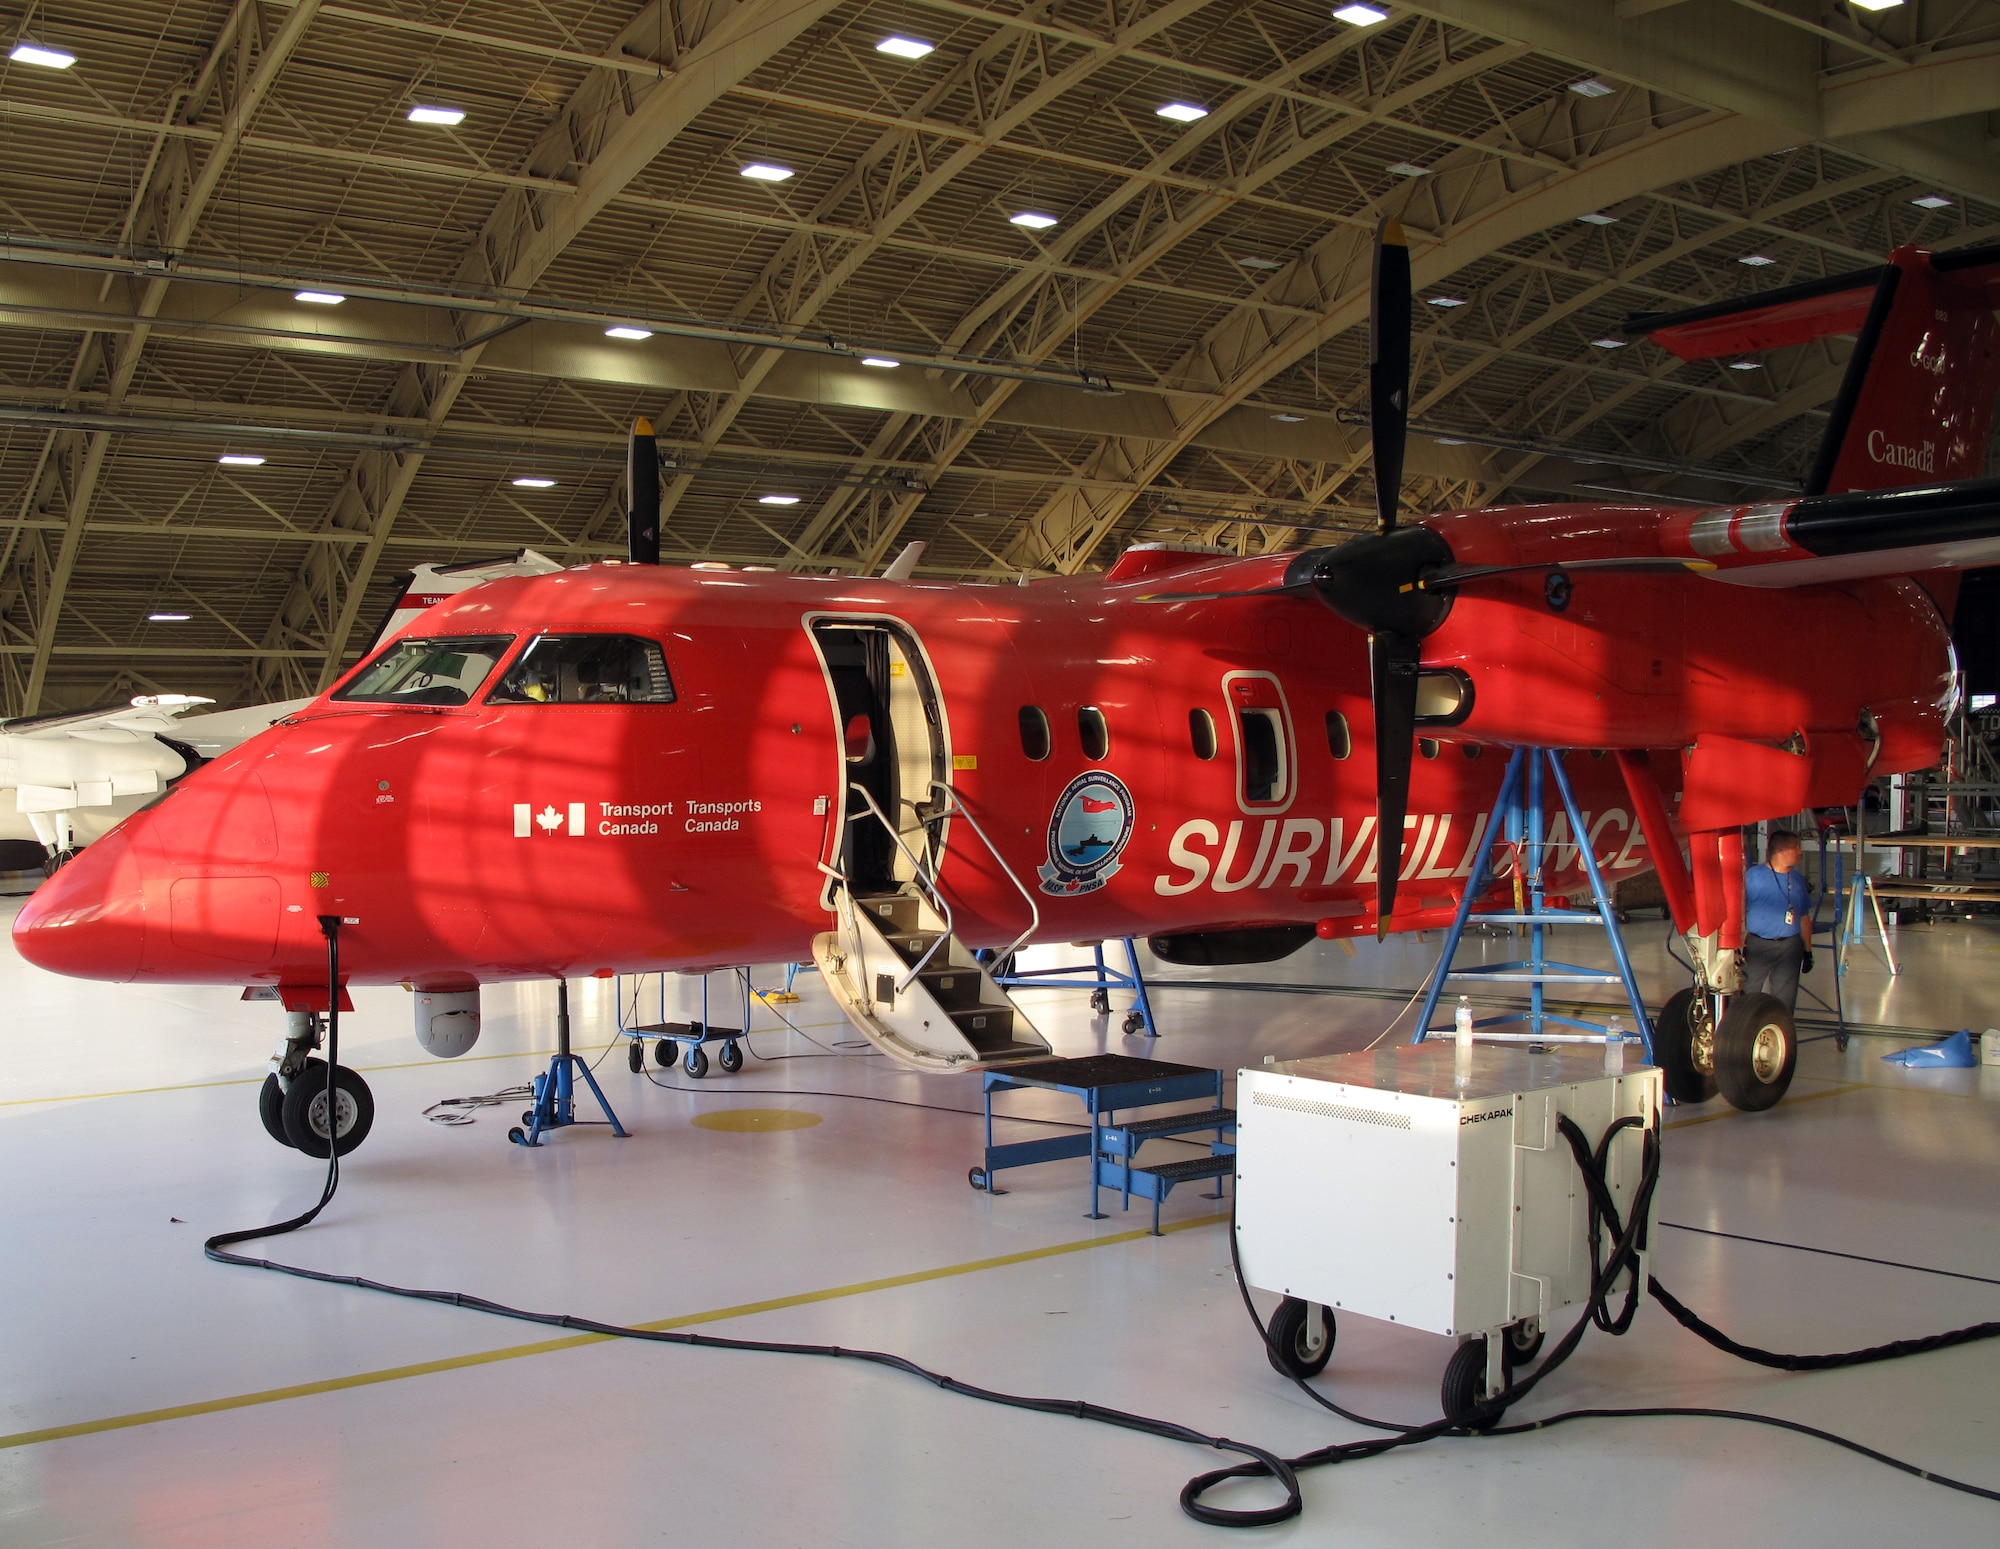 A Transport Canada Dash-8 100 series aircraft assigned to Canada's National Aerial Surveillance Program awaits repairs in Hangar 5 at Tyndall Air Force Base, Fla. May 5.  (U.S. Air Force Courtesy Photo)